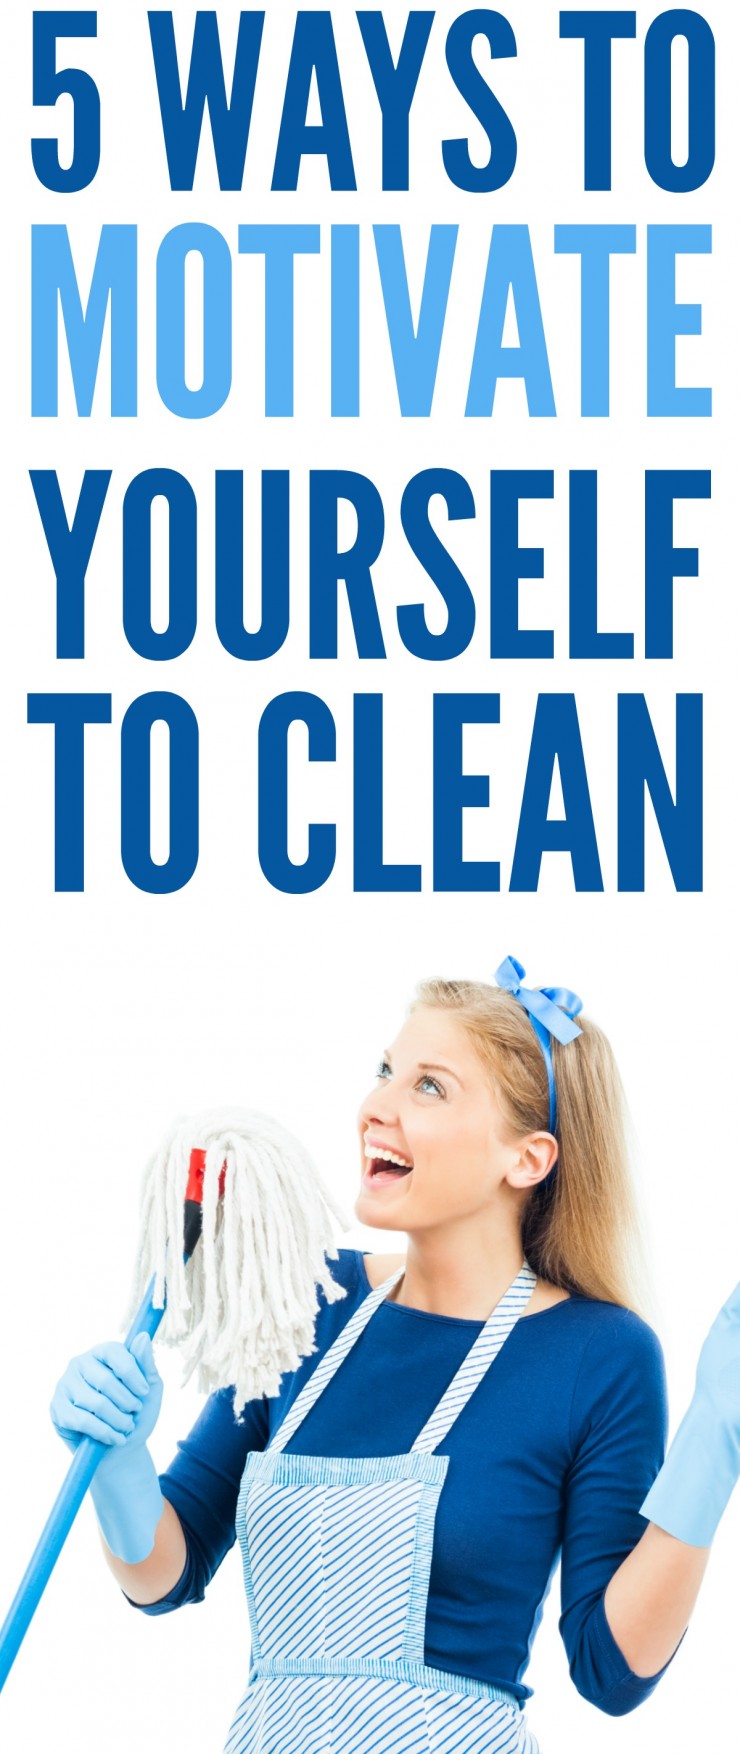 5 Ways to Motivate Yourself to Clean